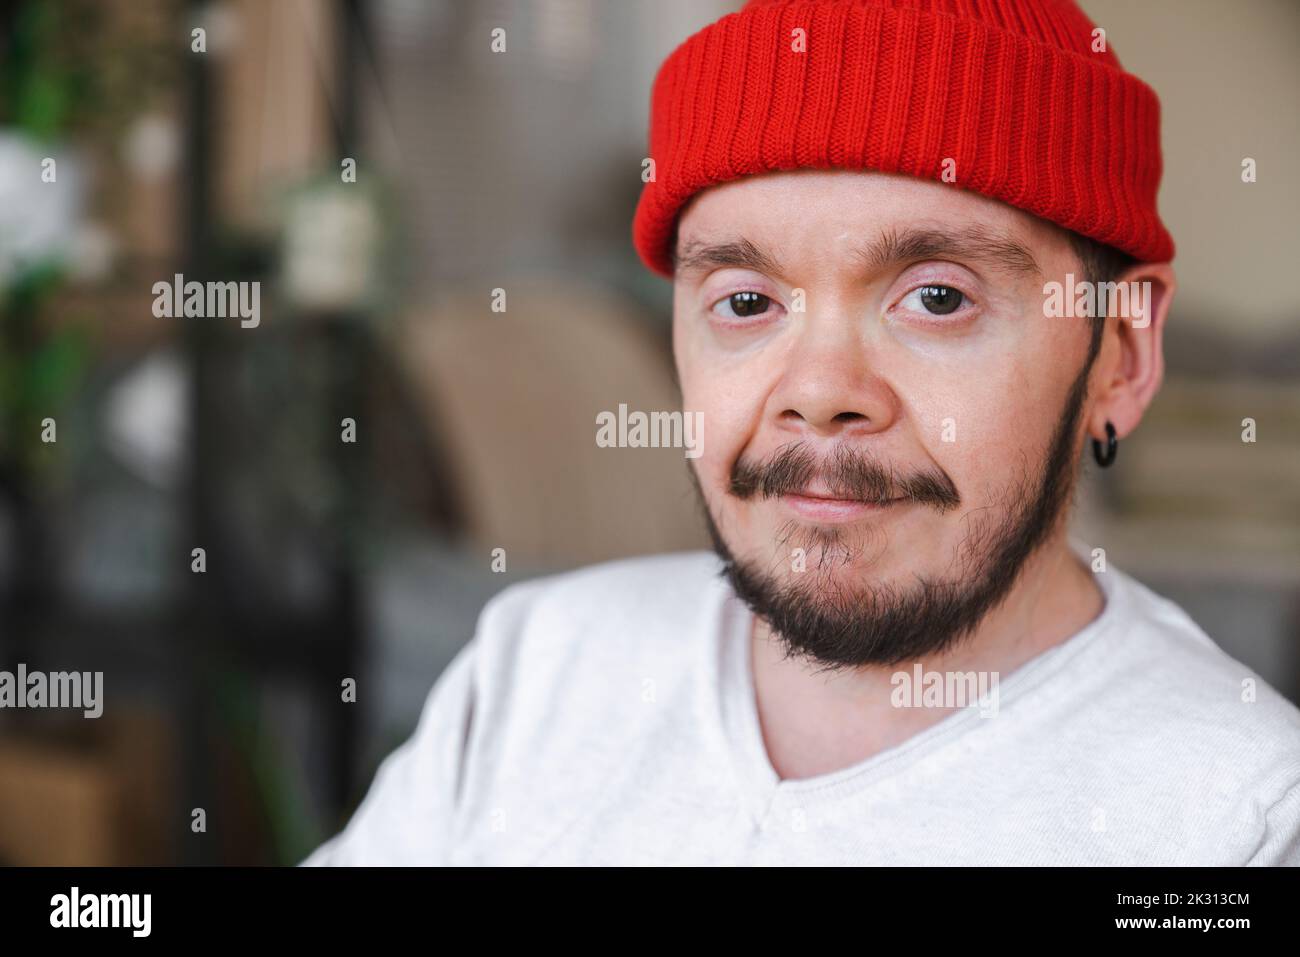 Confident man wearing red knit hat Stock Photo